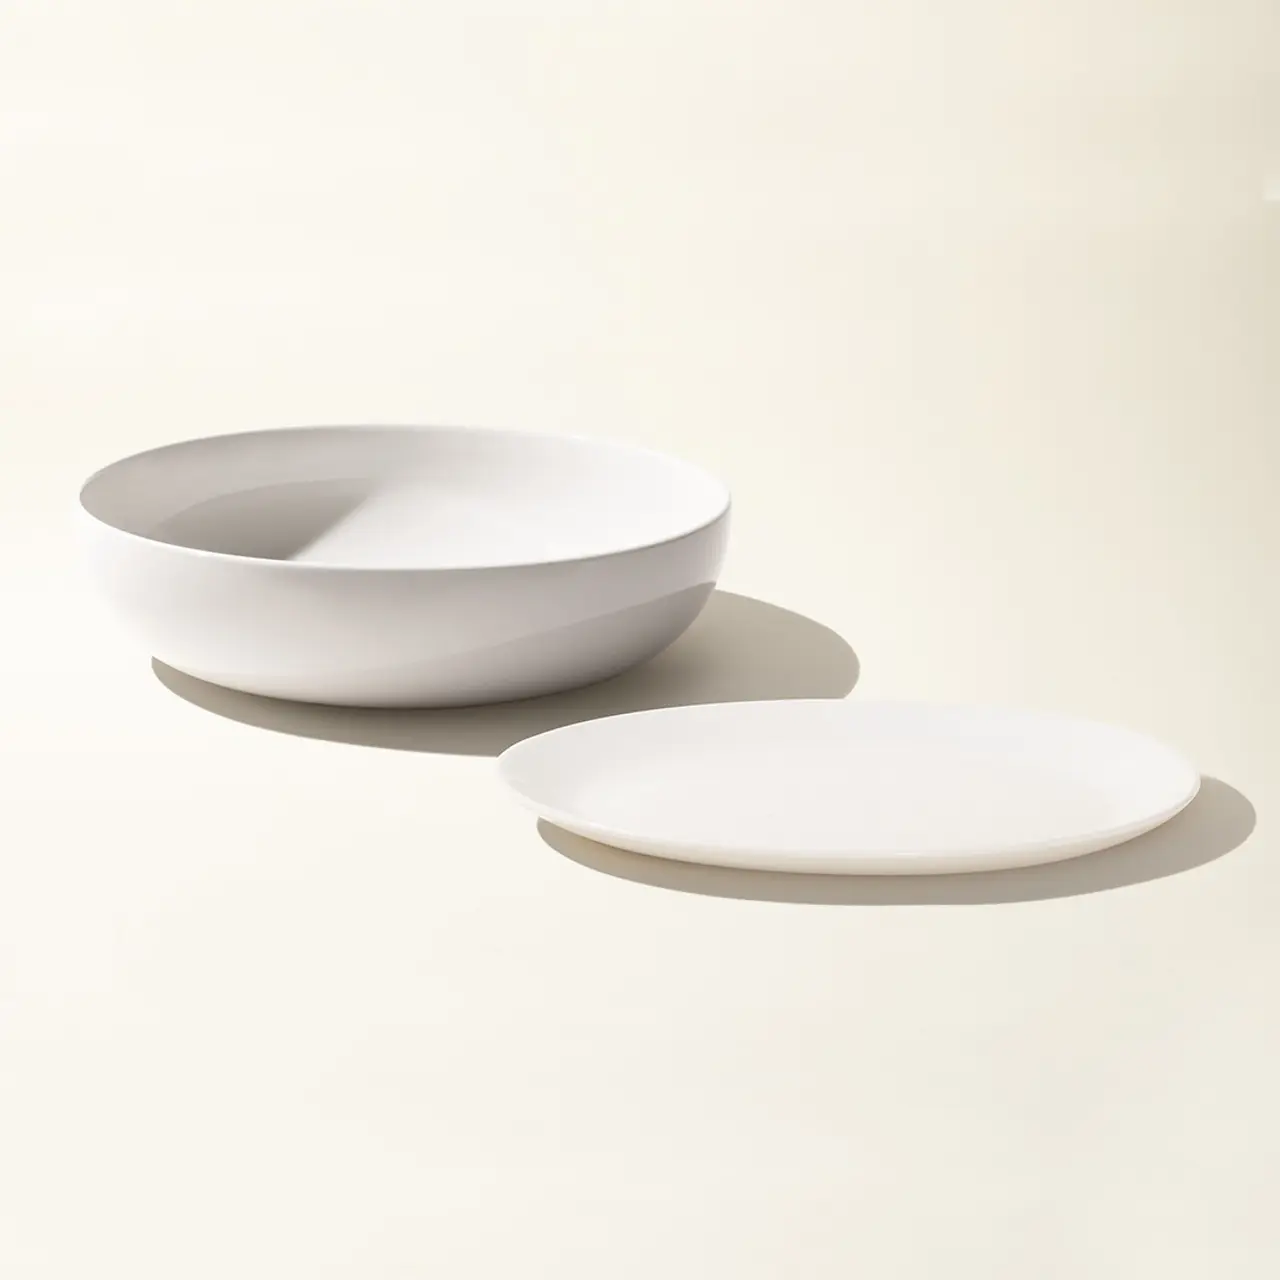 A white bowl and plate are placed on a light-colored surface with a shadow casting to the side.